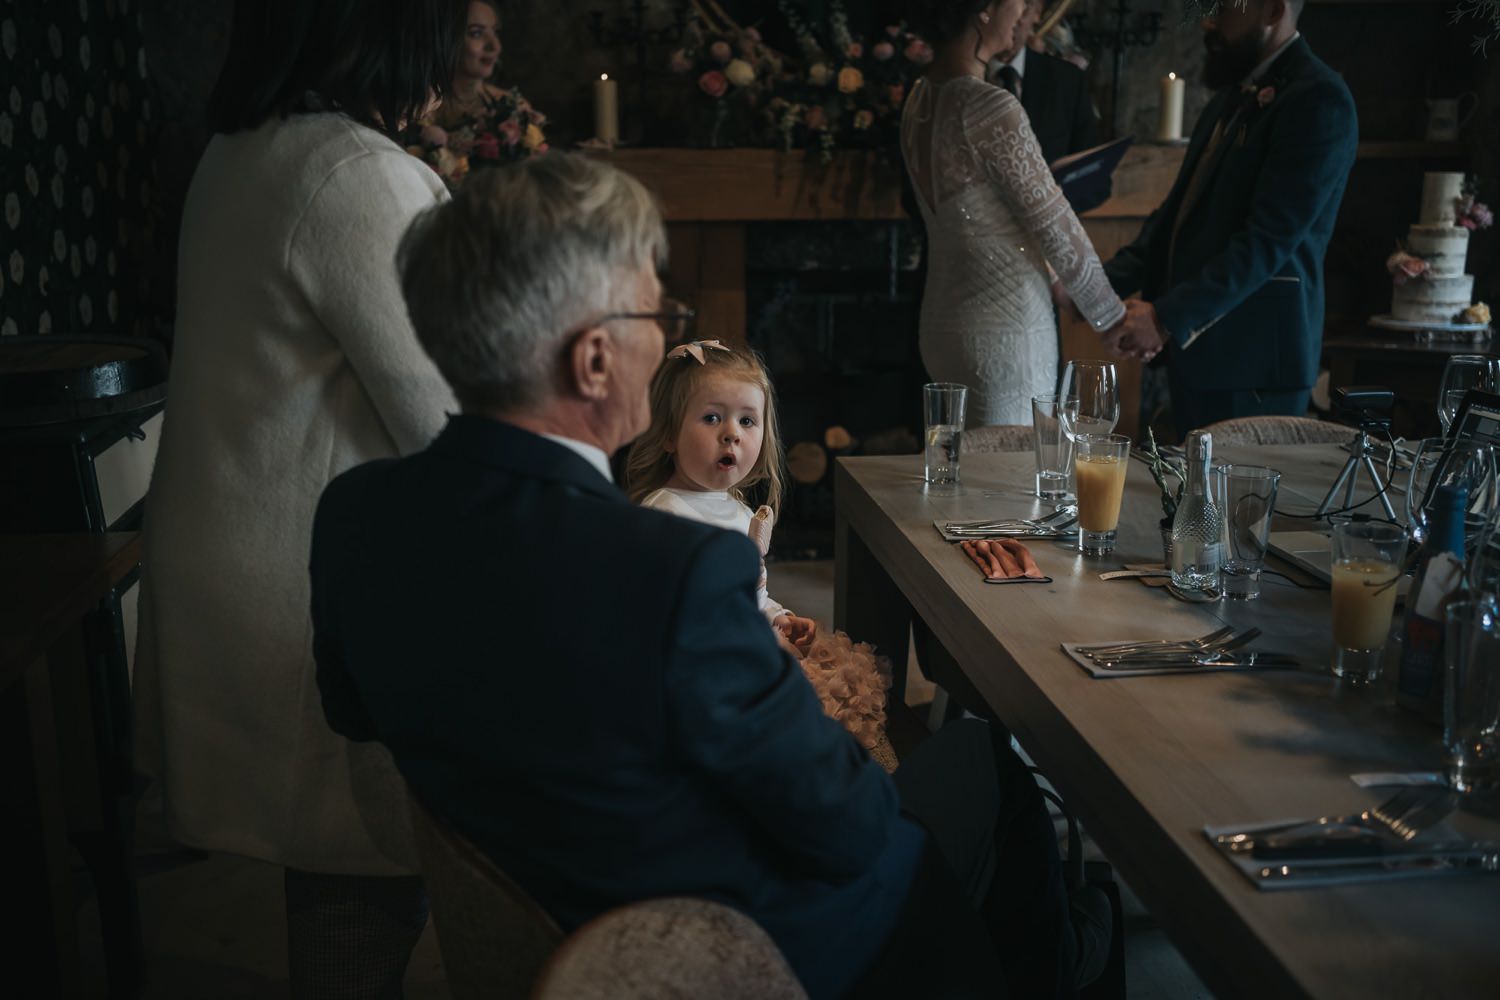 A small child smiles at the camera as the couple get married in the background